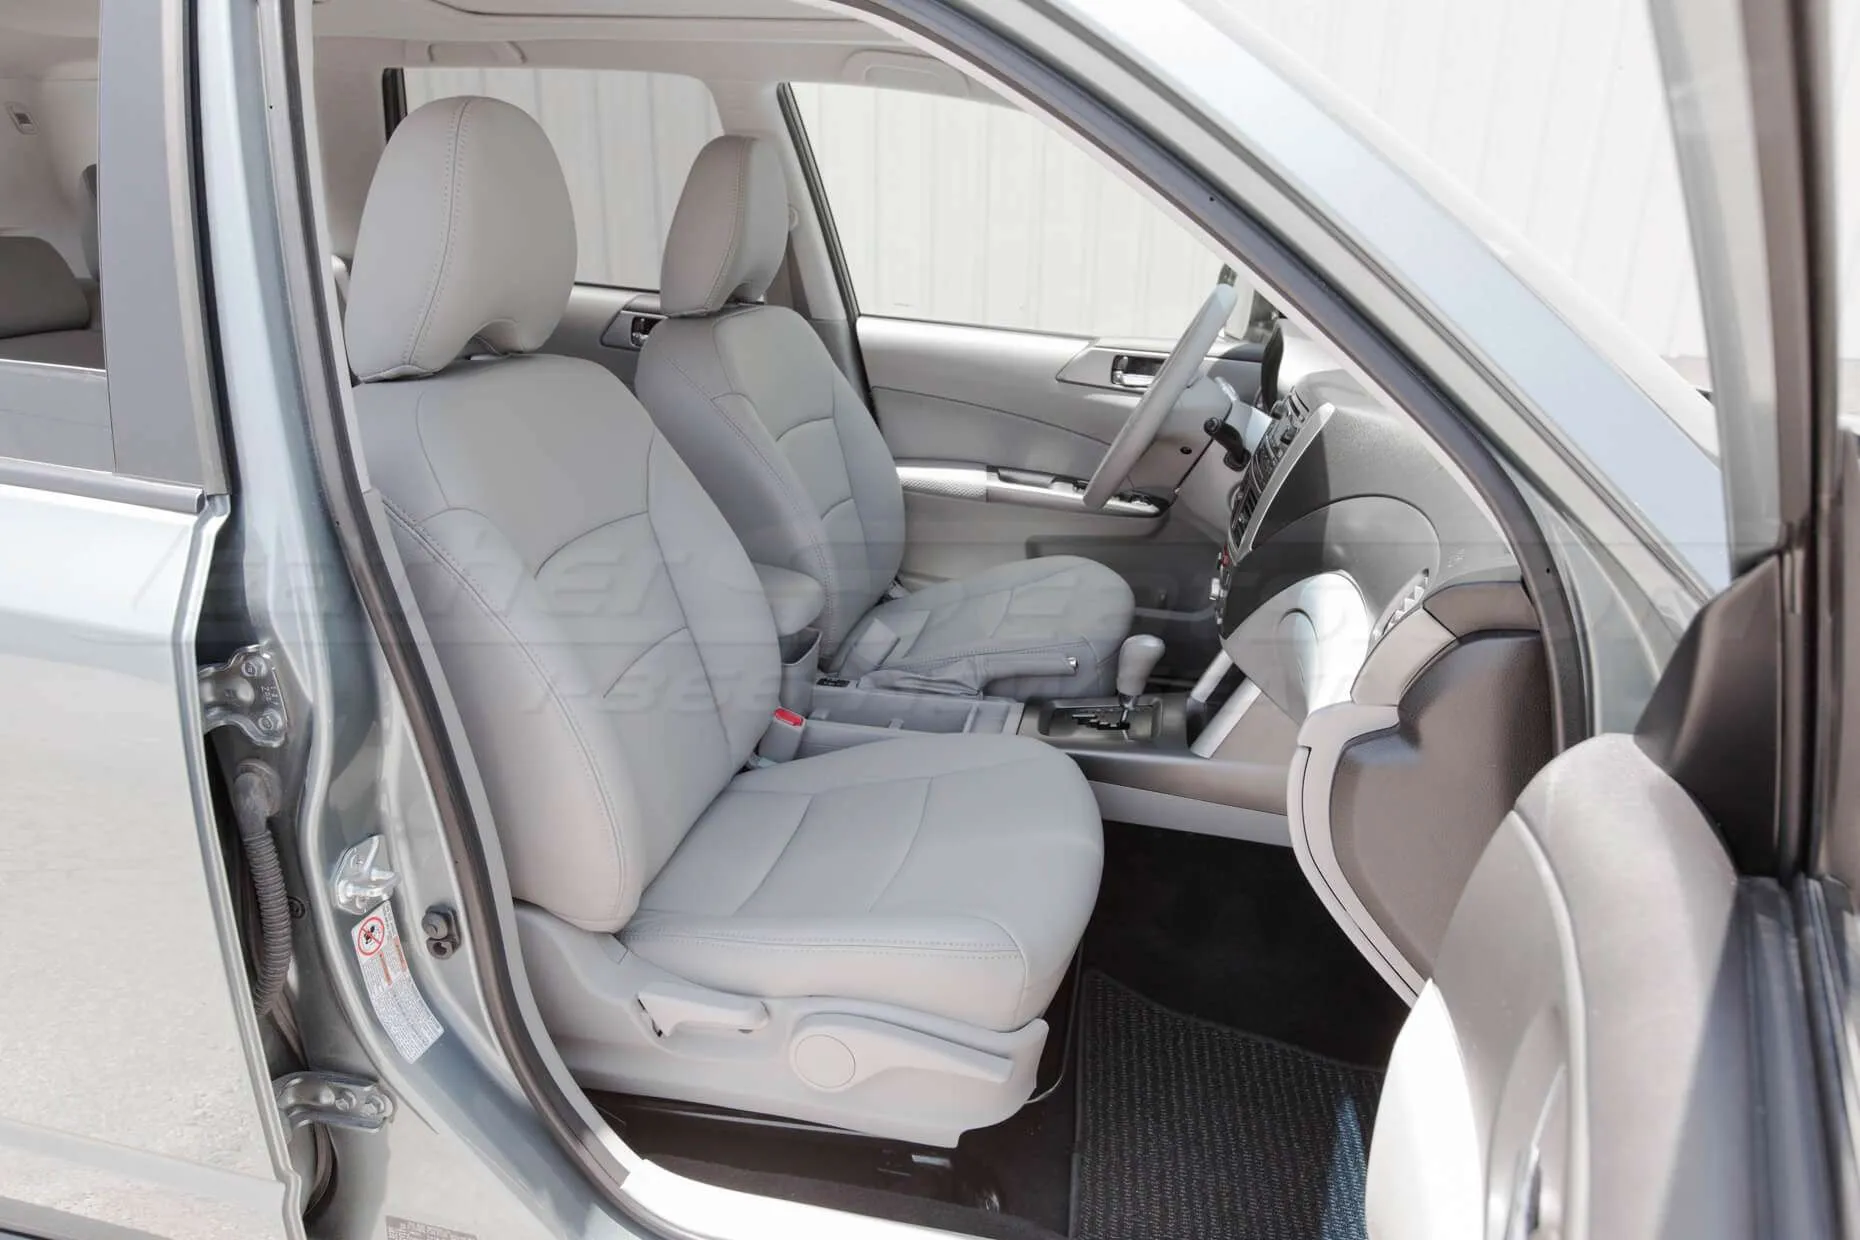 2011-2013 Subaru Forester Leather Seats - Ash - Installed Front interior from passenger side